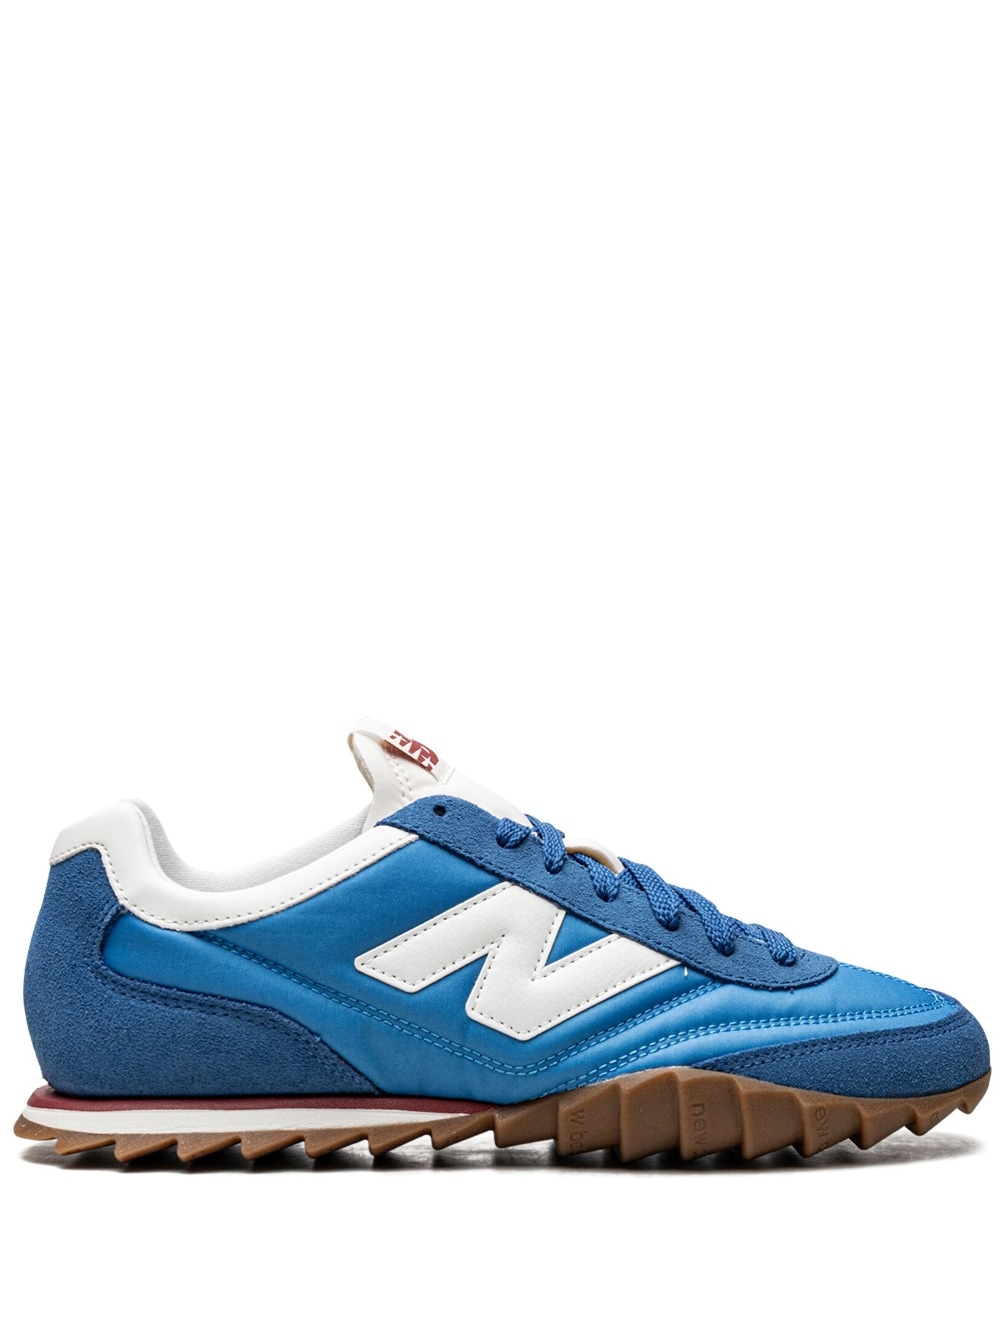 New Balance RC30 low-top sneakers - Blue